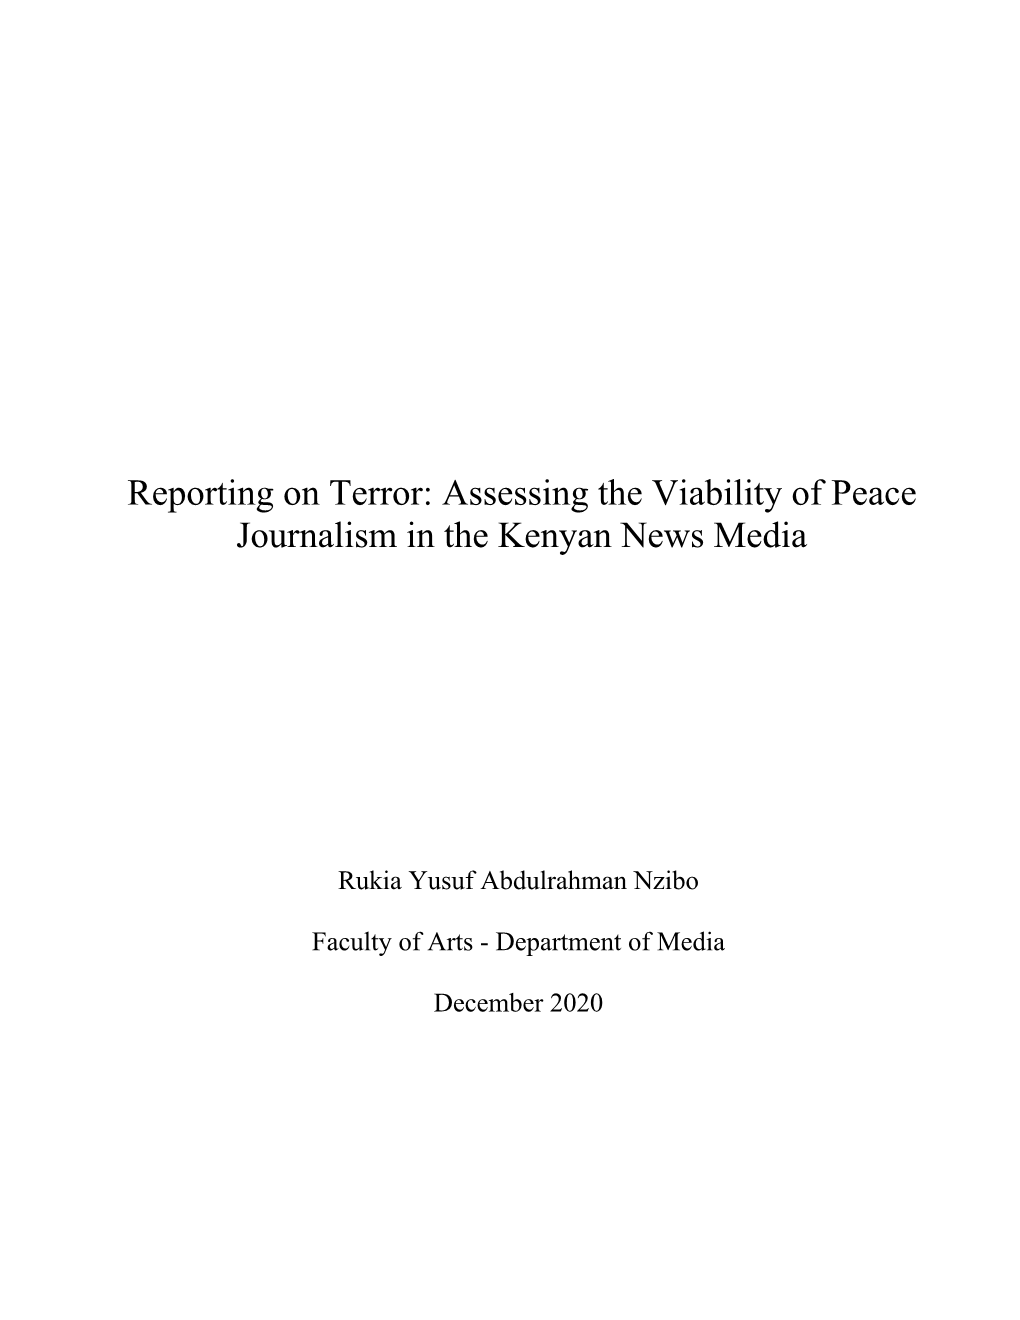 Reporting on Terror: Assessing the Viability of Peace Journalism in the Kenyan News Media